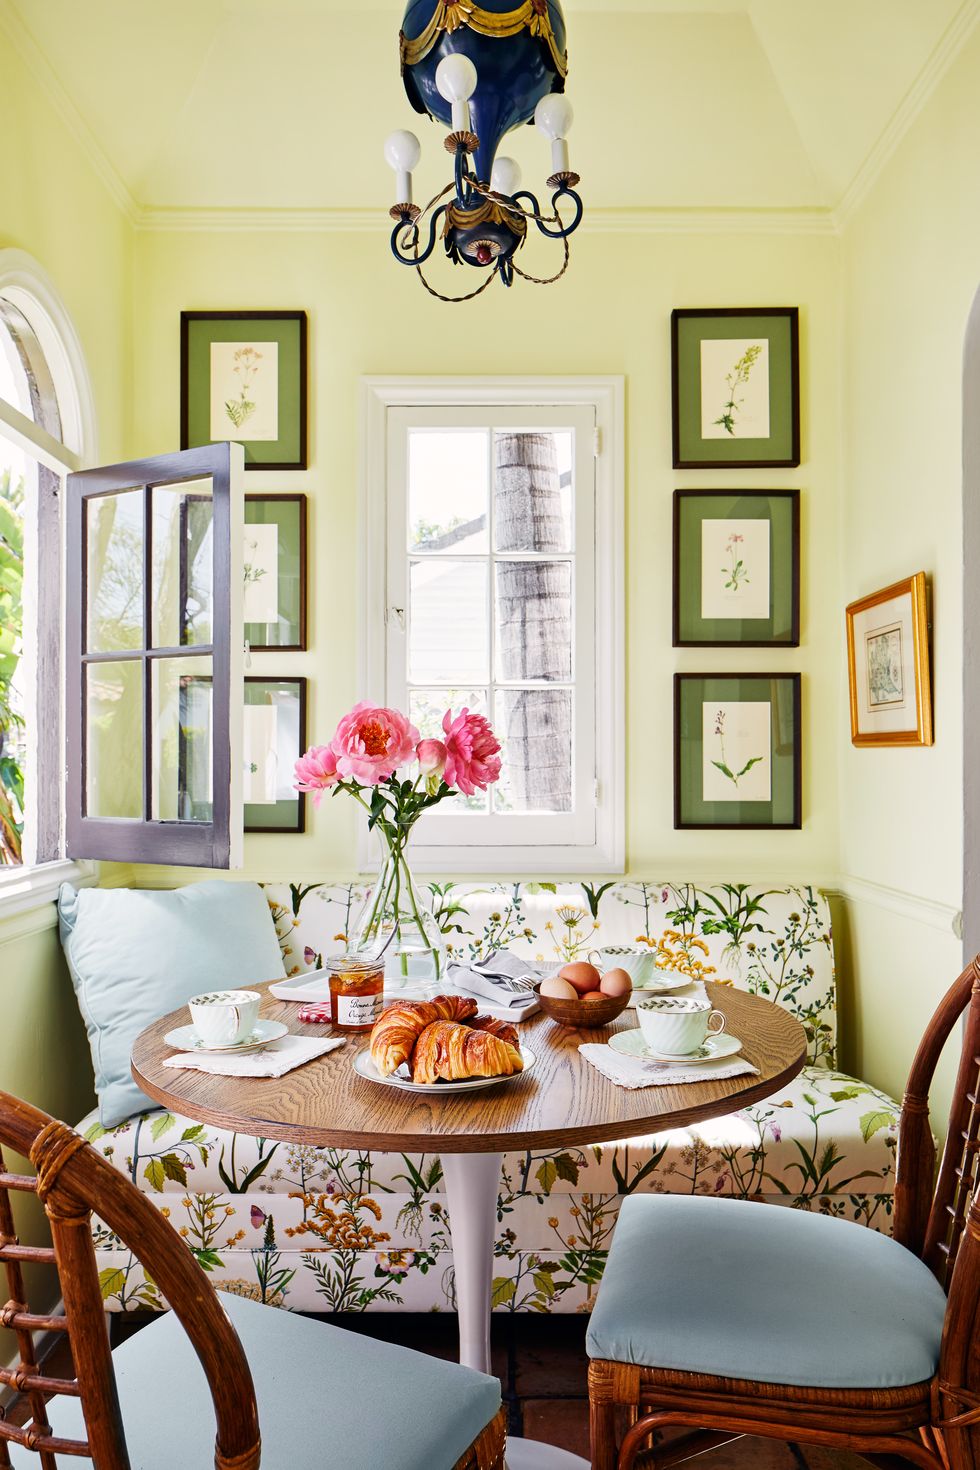 kevin isbell, breakfast nook, table, wooden chairs, green painted walls